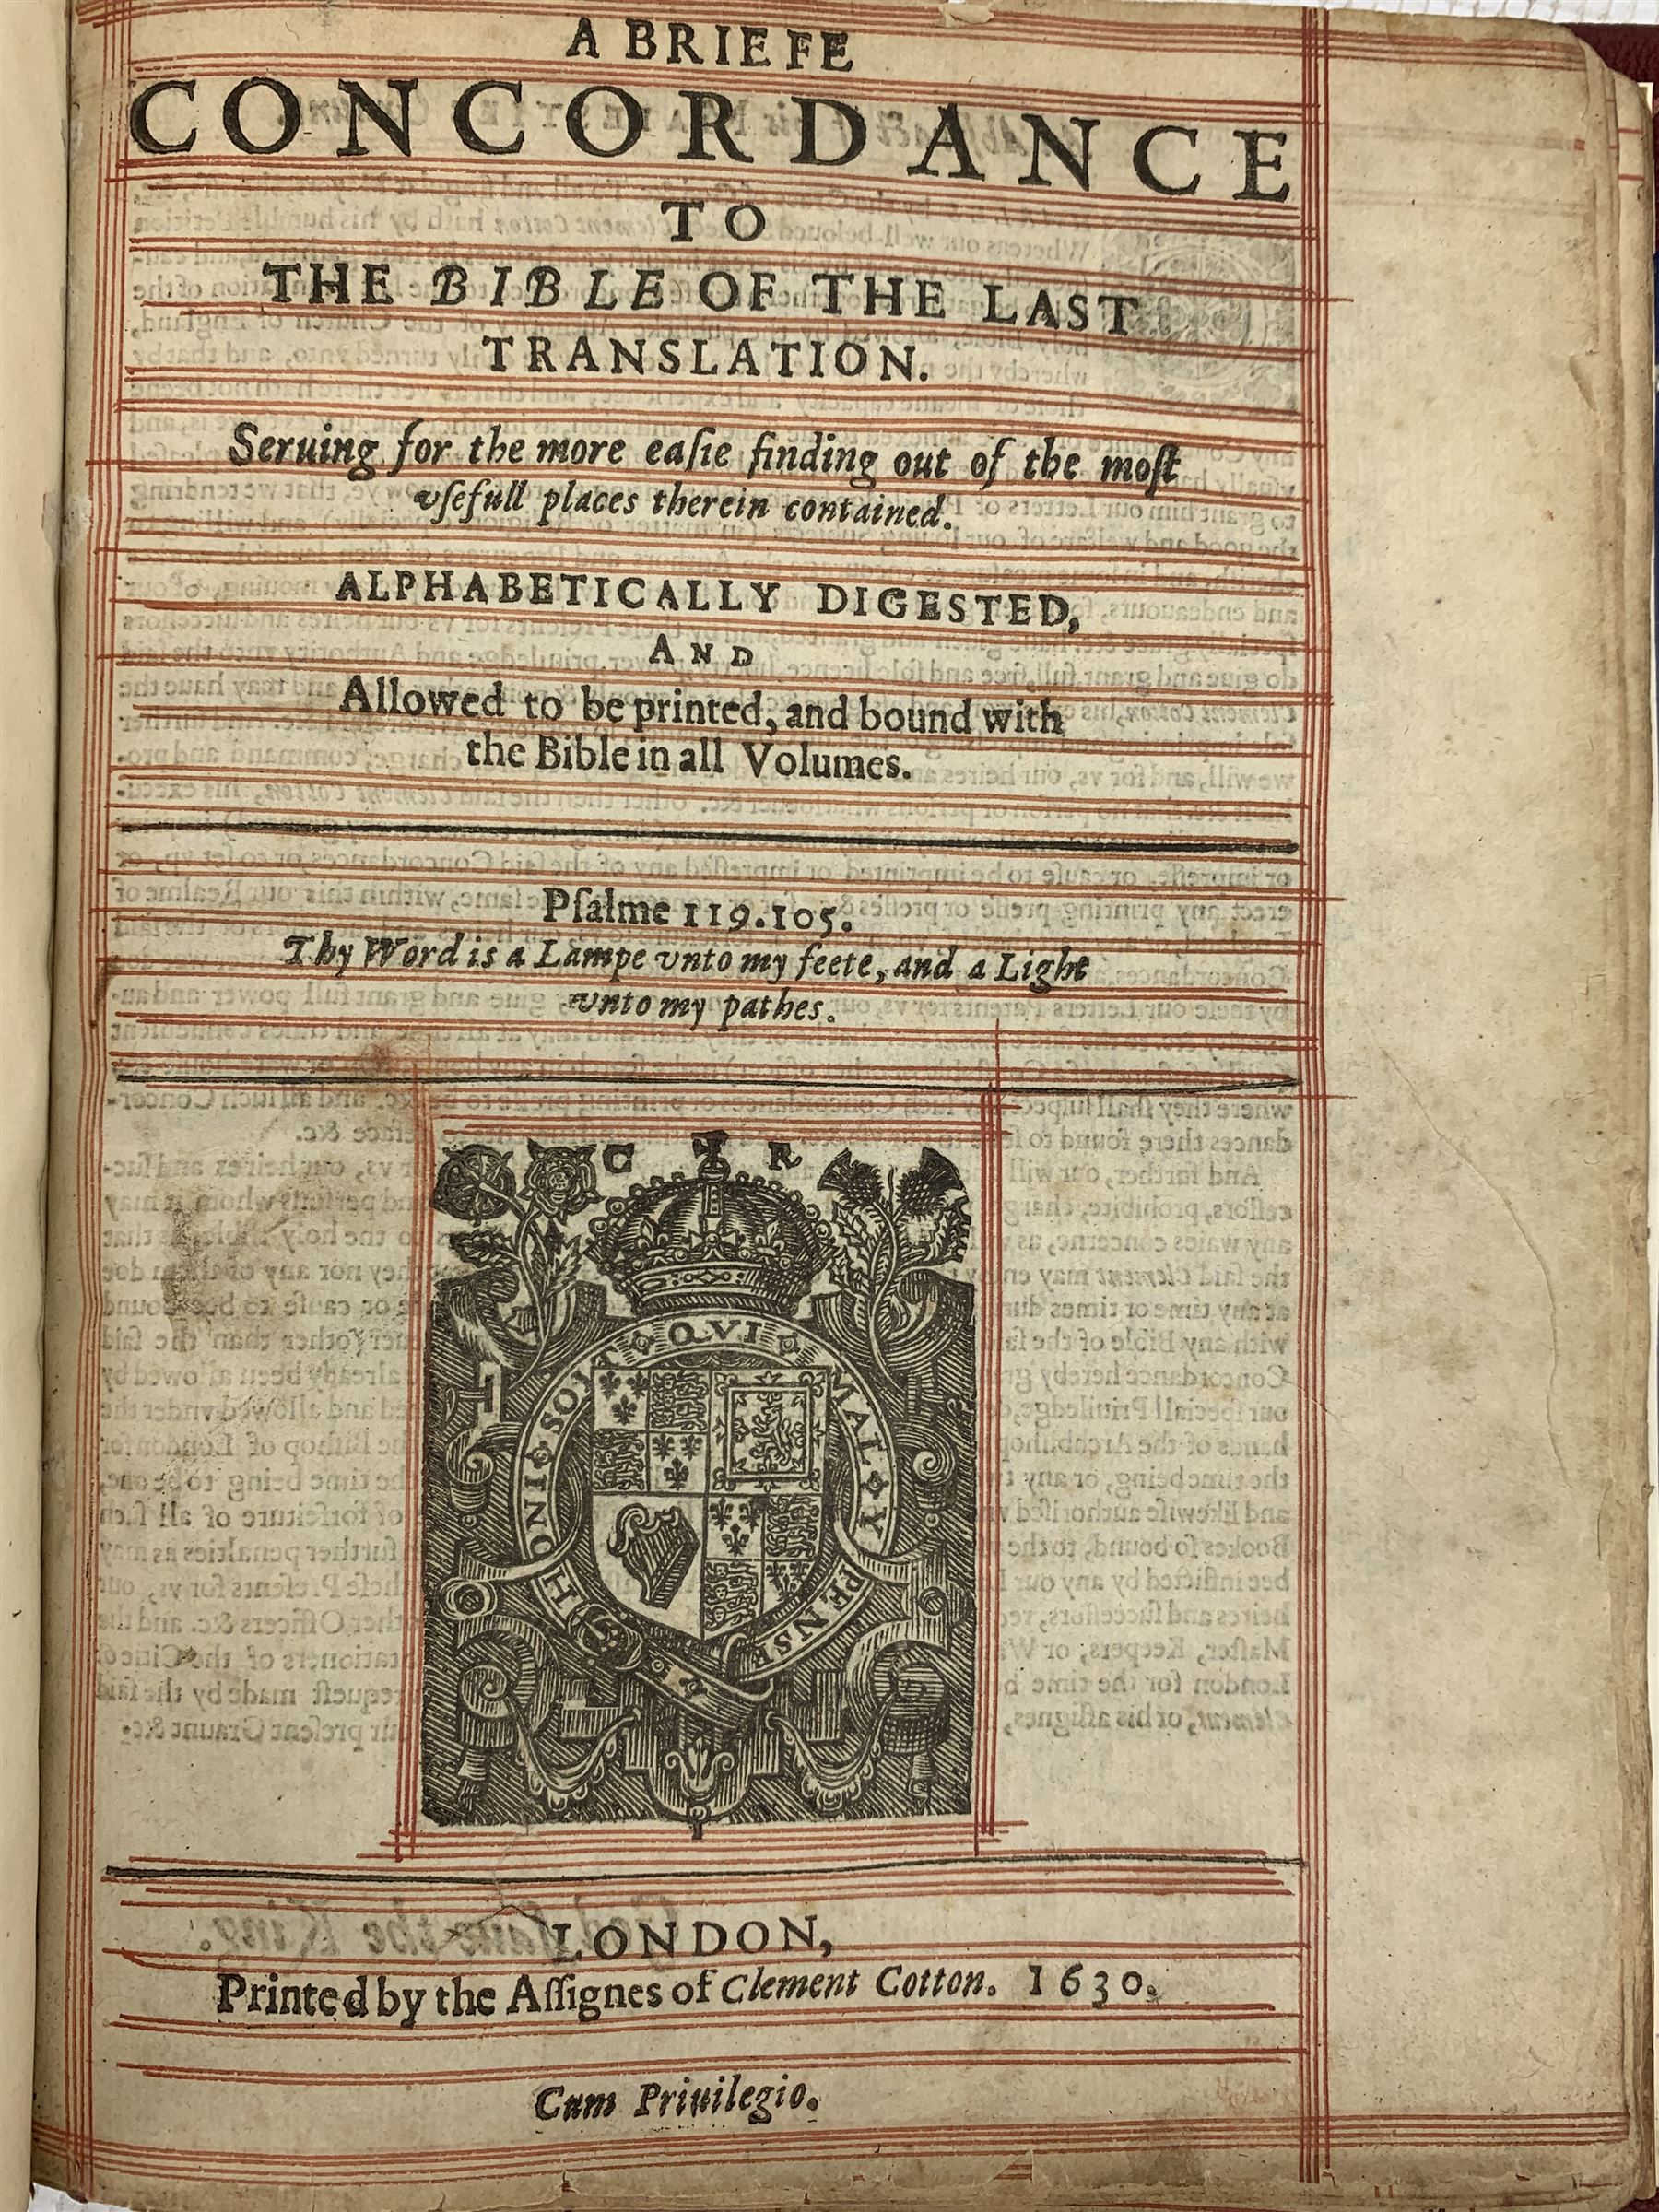 Certain Sermons or Homilies appointed to be read in Churches............ printed by John Bill 1623 a - Image 2 of 5